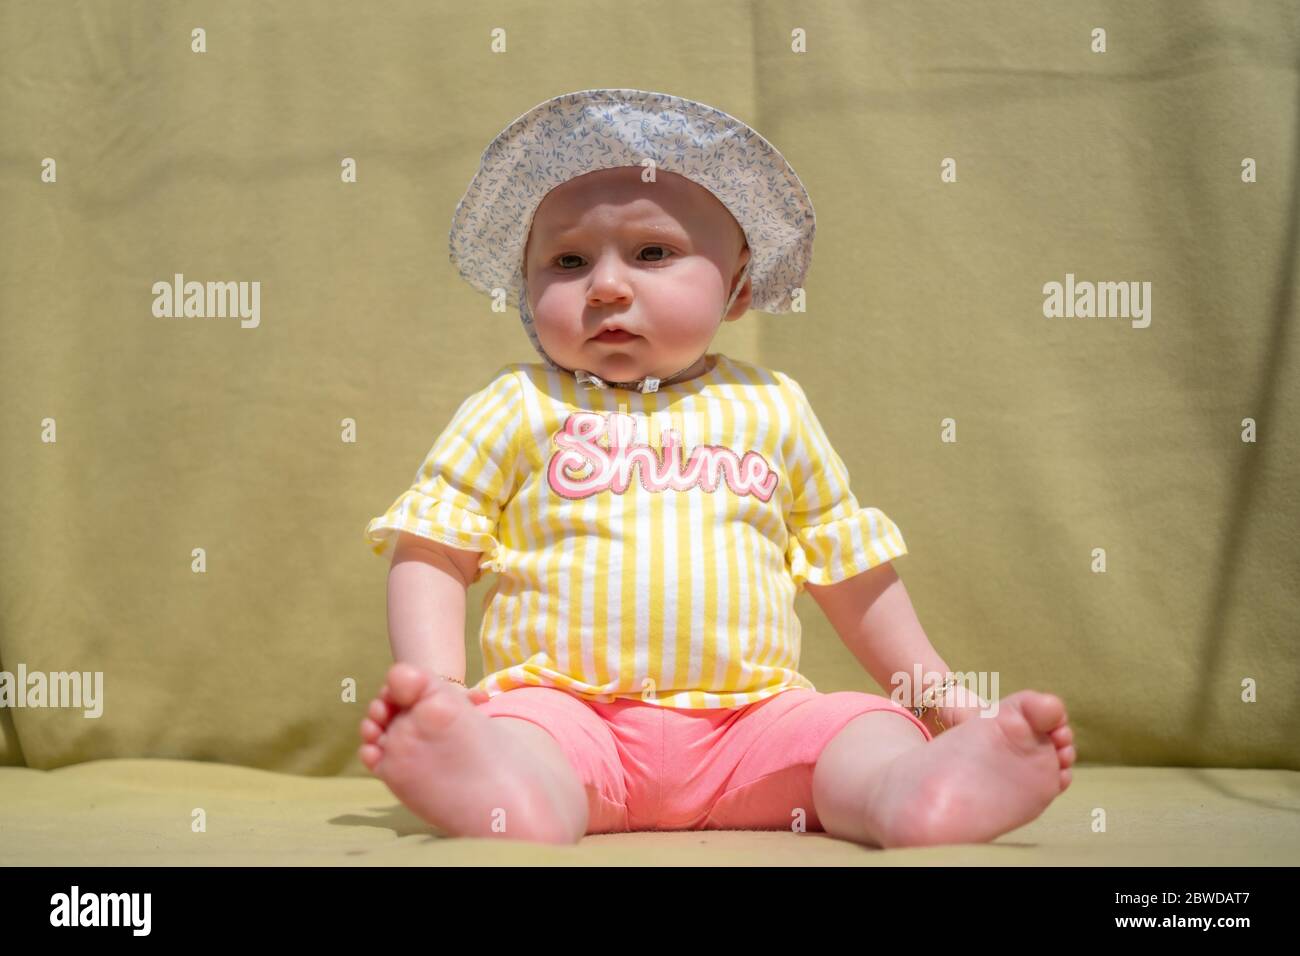 Cute baby girl wear adorable hat looking at camera make funny faces on green background Stock Photo